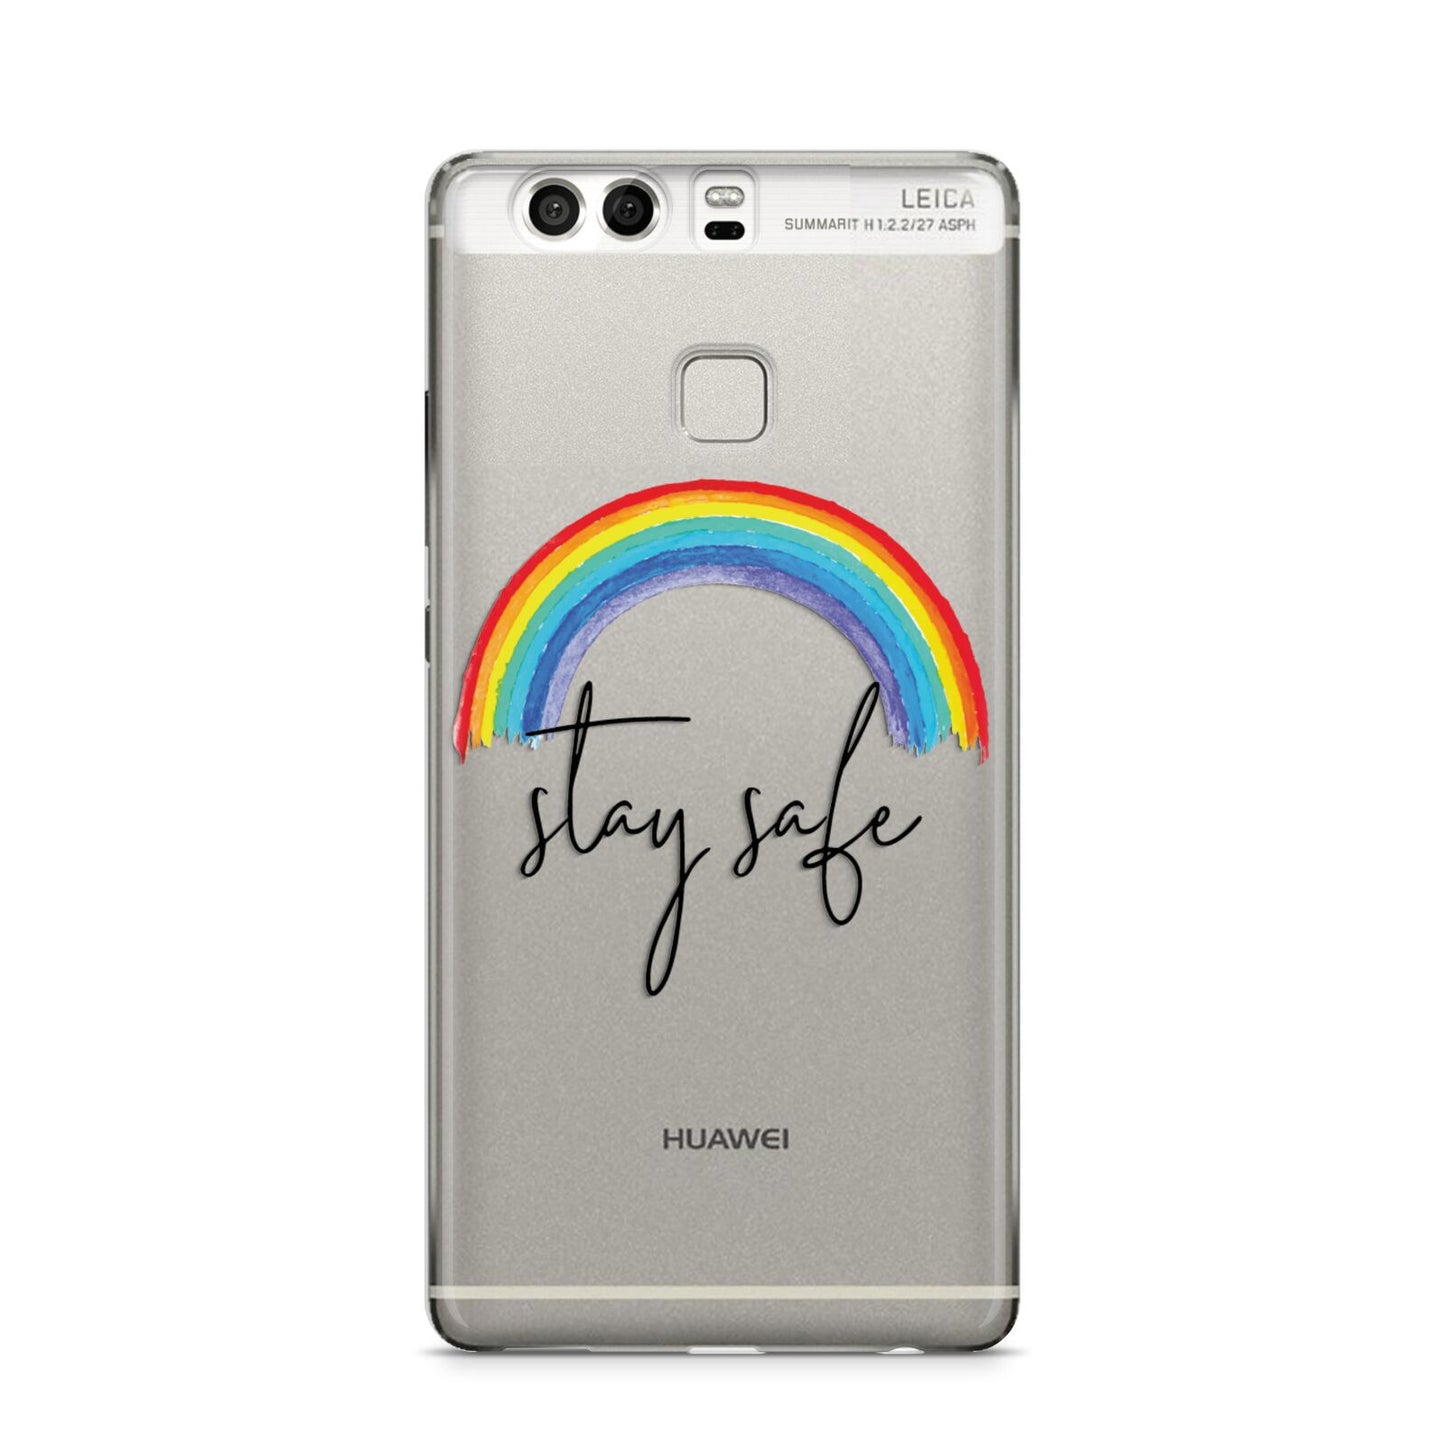 Stay Safe Rainbow Huawei P9 Case